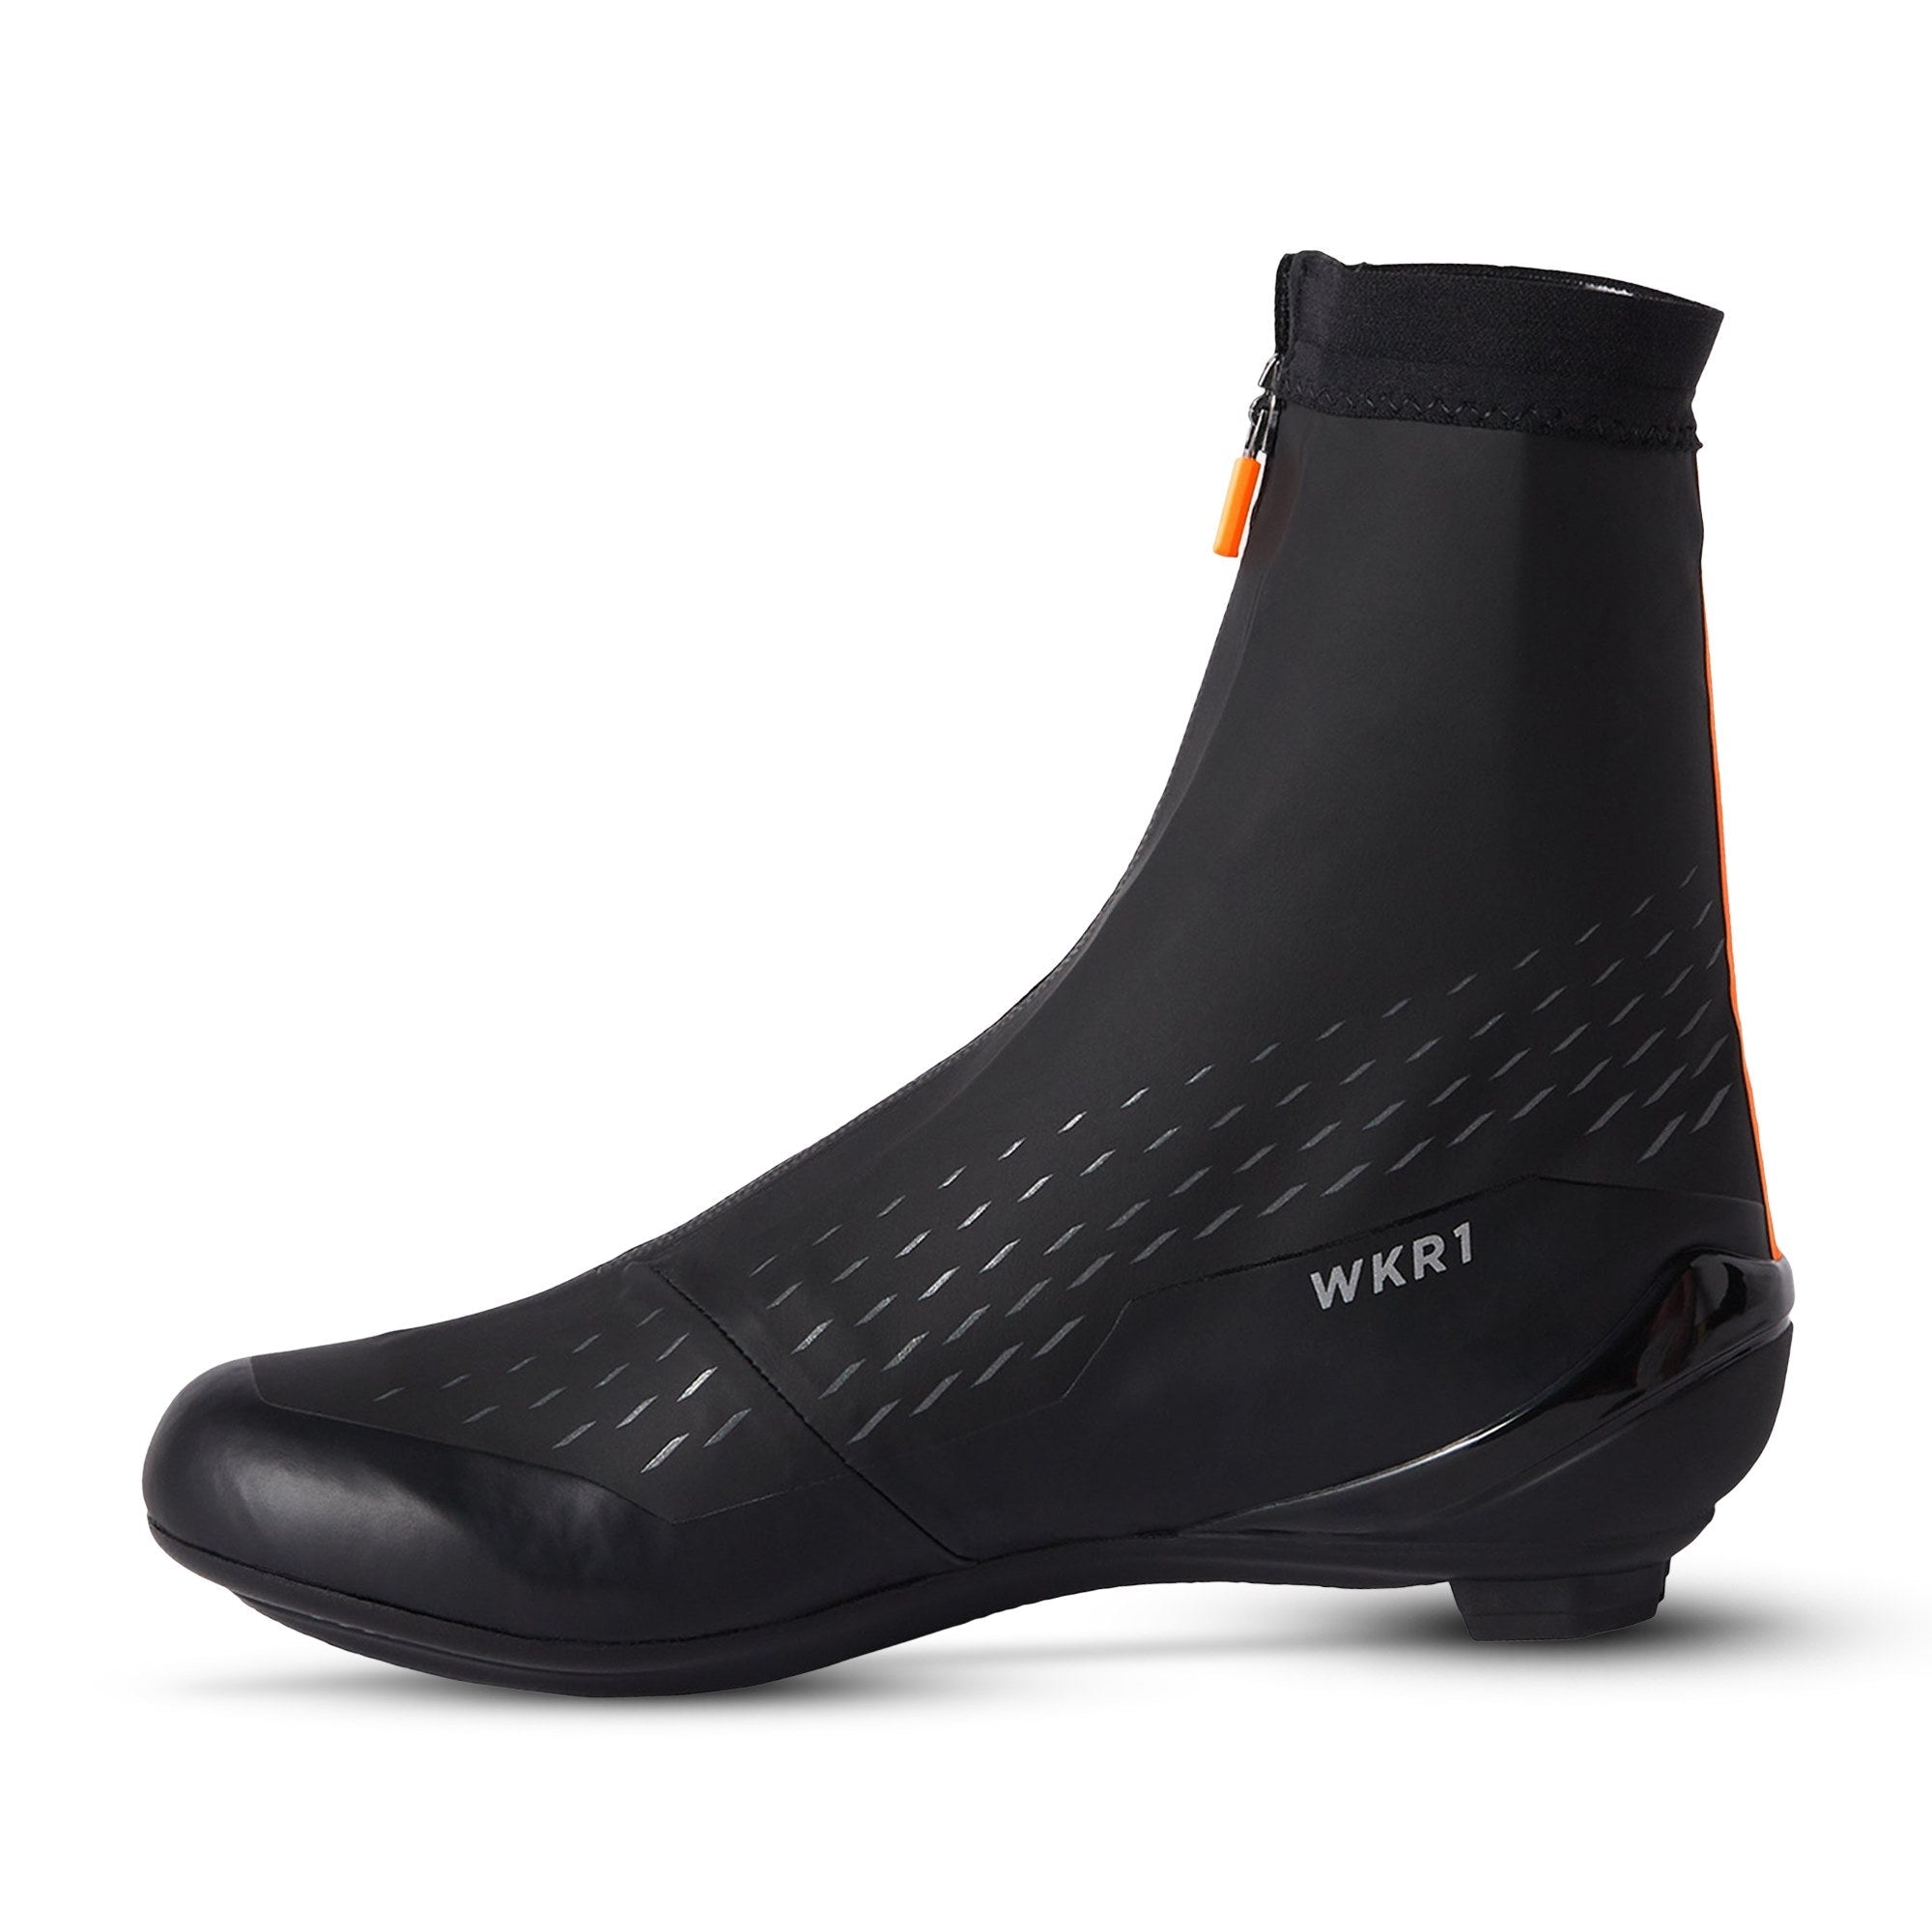 WKR1 Winter Knit Road Shoes